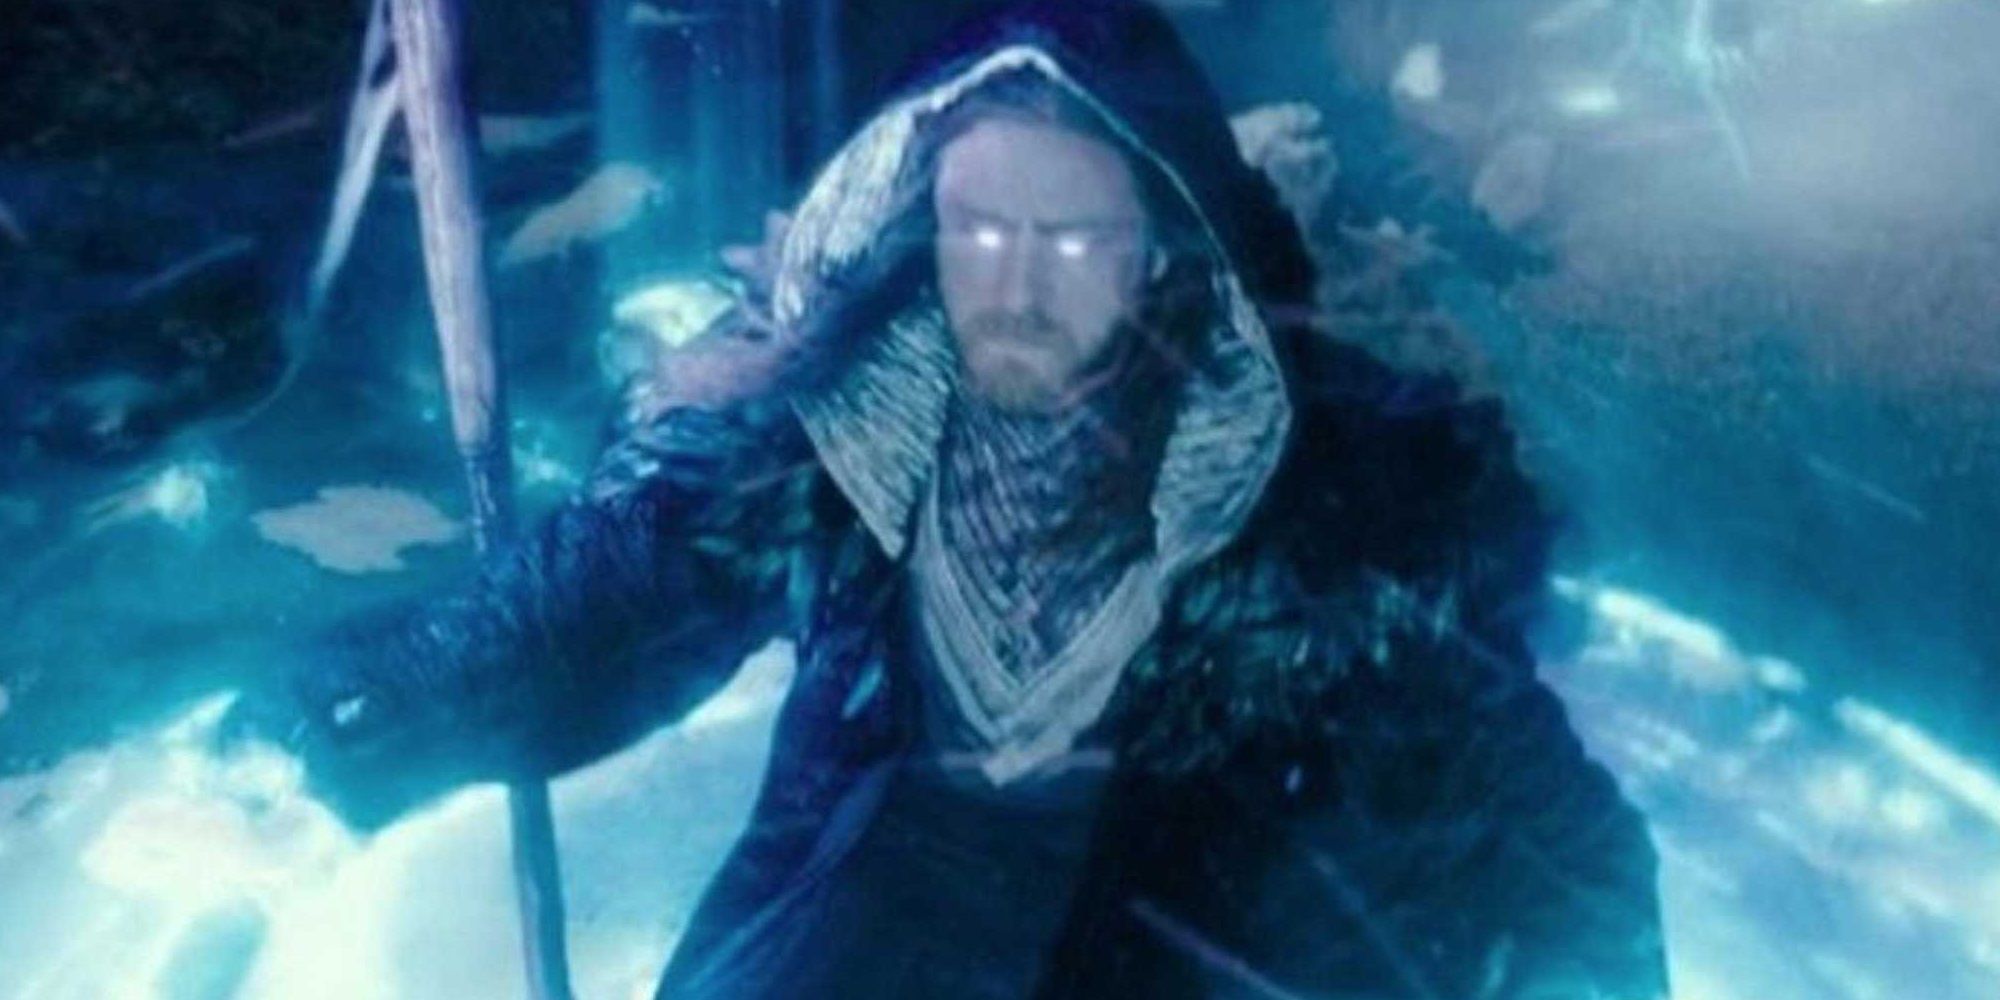 A warlock using magic in the Warcraft movie